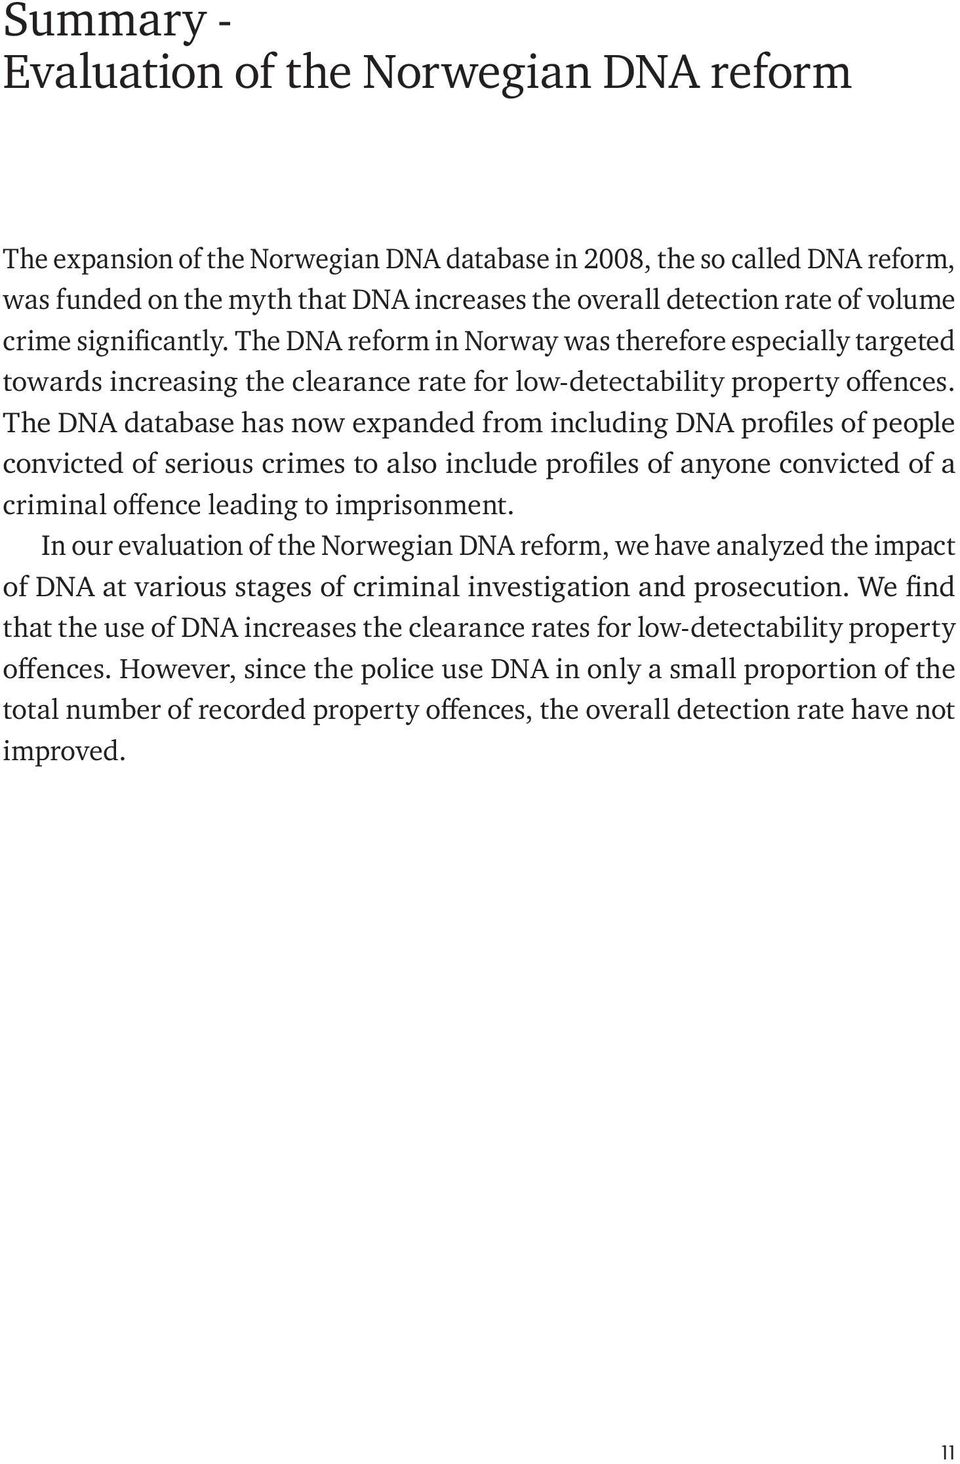 The DNA database has now expanded from including DNA profiles of people convicted of serious crimes to also include profiles of anyone convicted of a criminal offence leading to imprisonment.